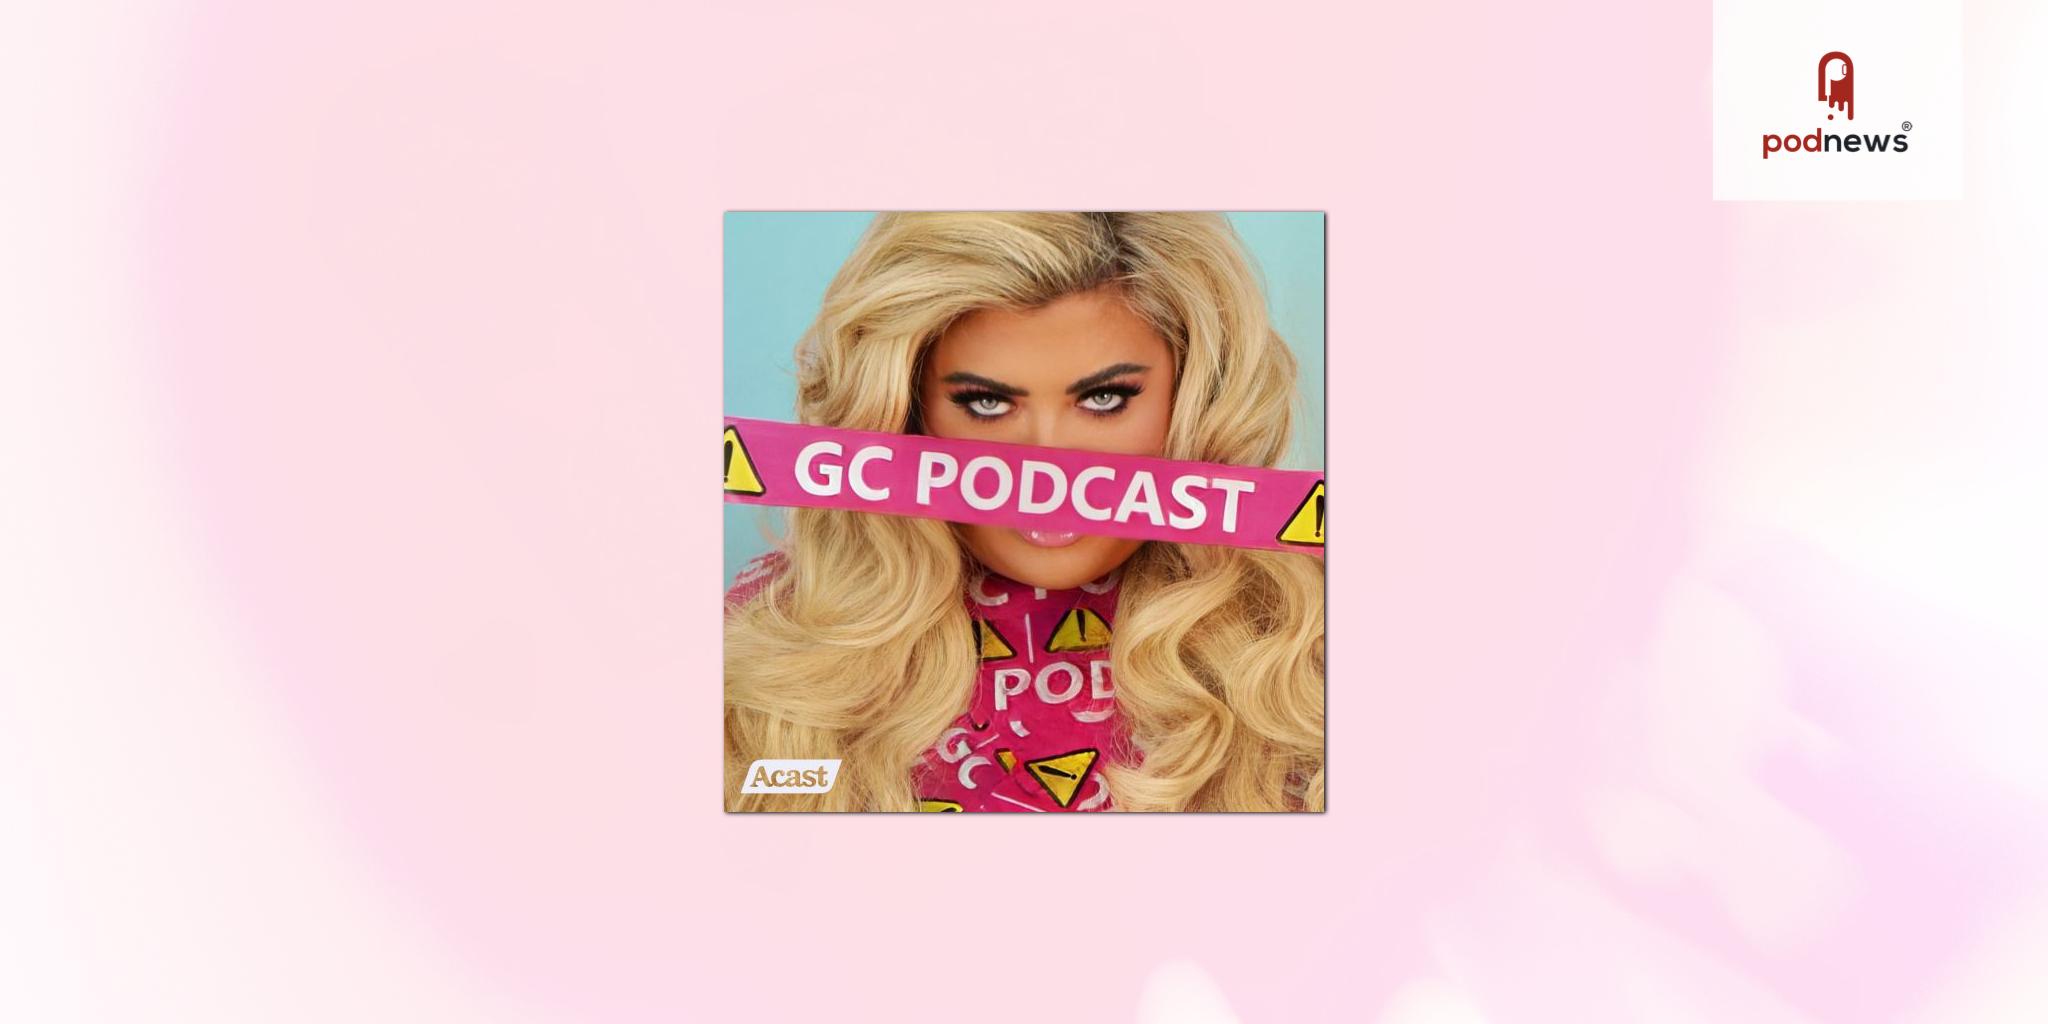 Gemma Collins brings her hit podcast to Acast